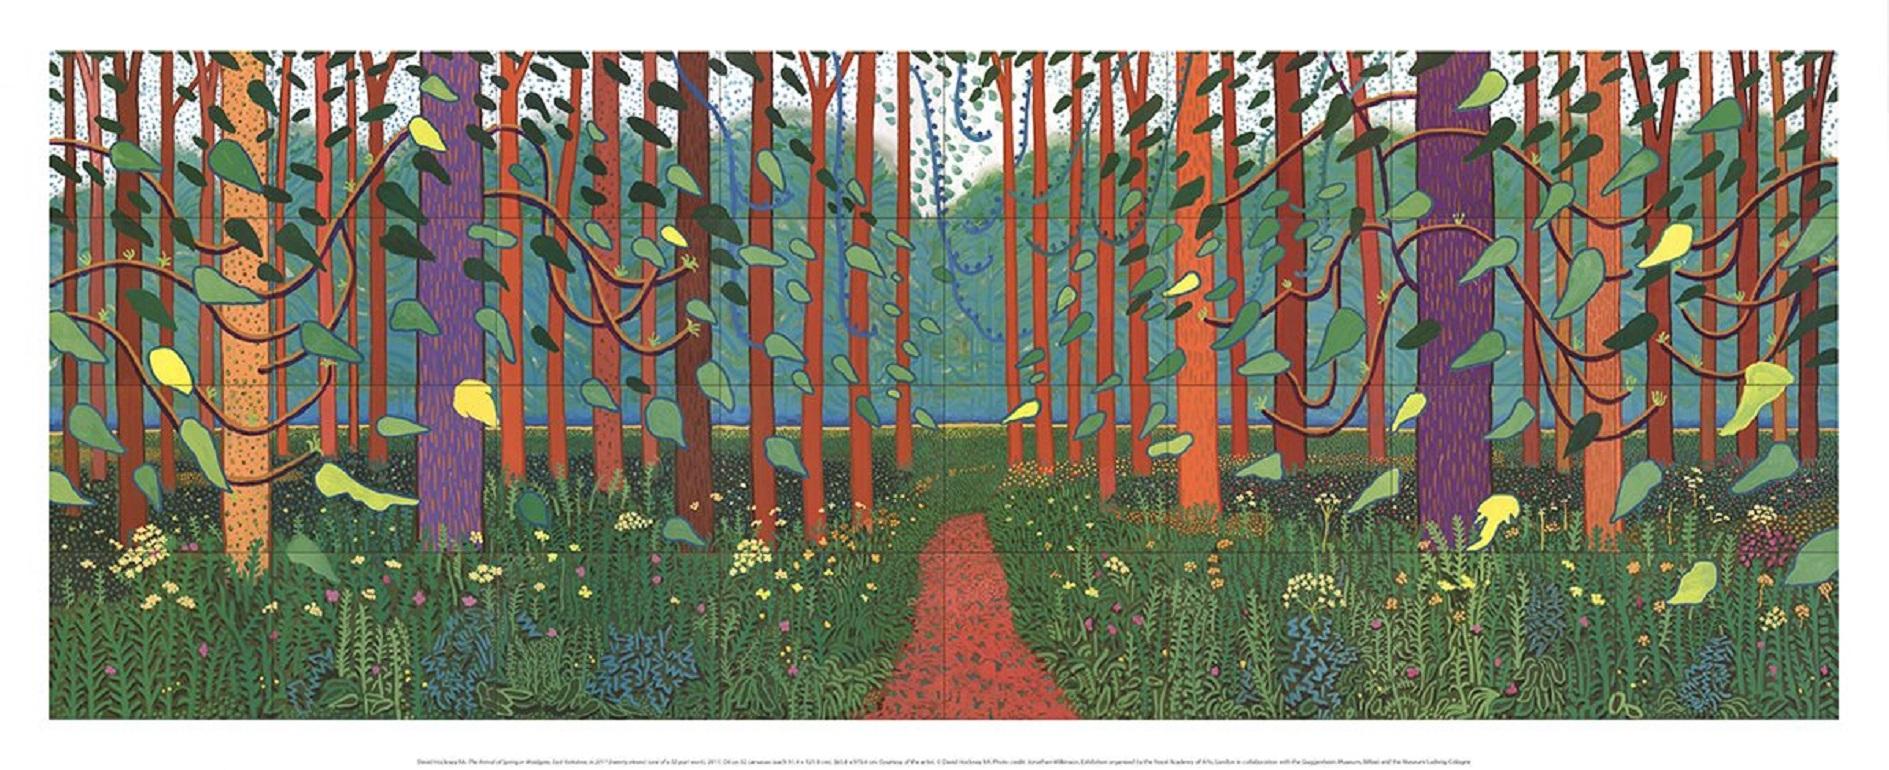  Paper Size: 20.5 x 50 inches ( 52.07 x 127 cm )
 Image Size: 18 x 47.5 inches ( 45.72 x 120.65 cm )
 Framed: No
 Condition: A: Mint
 
 Additional Details: Colorfully captivating image of wooded area in the artist's native Yorkshire. This landscaped